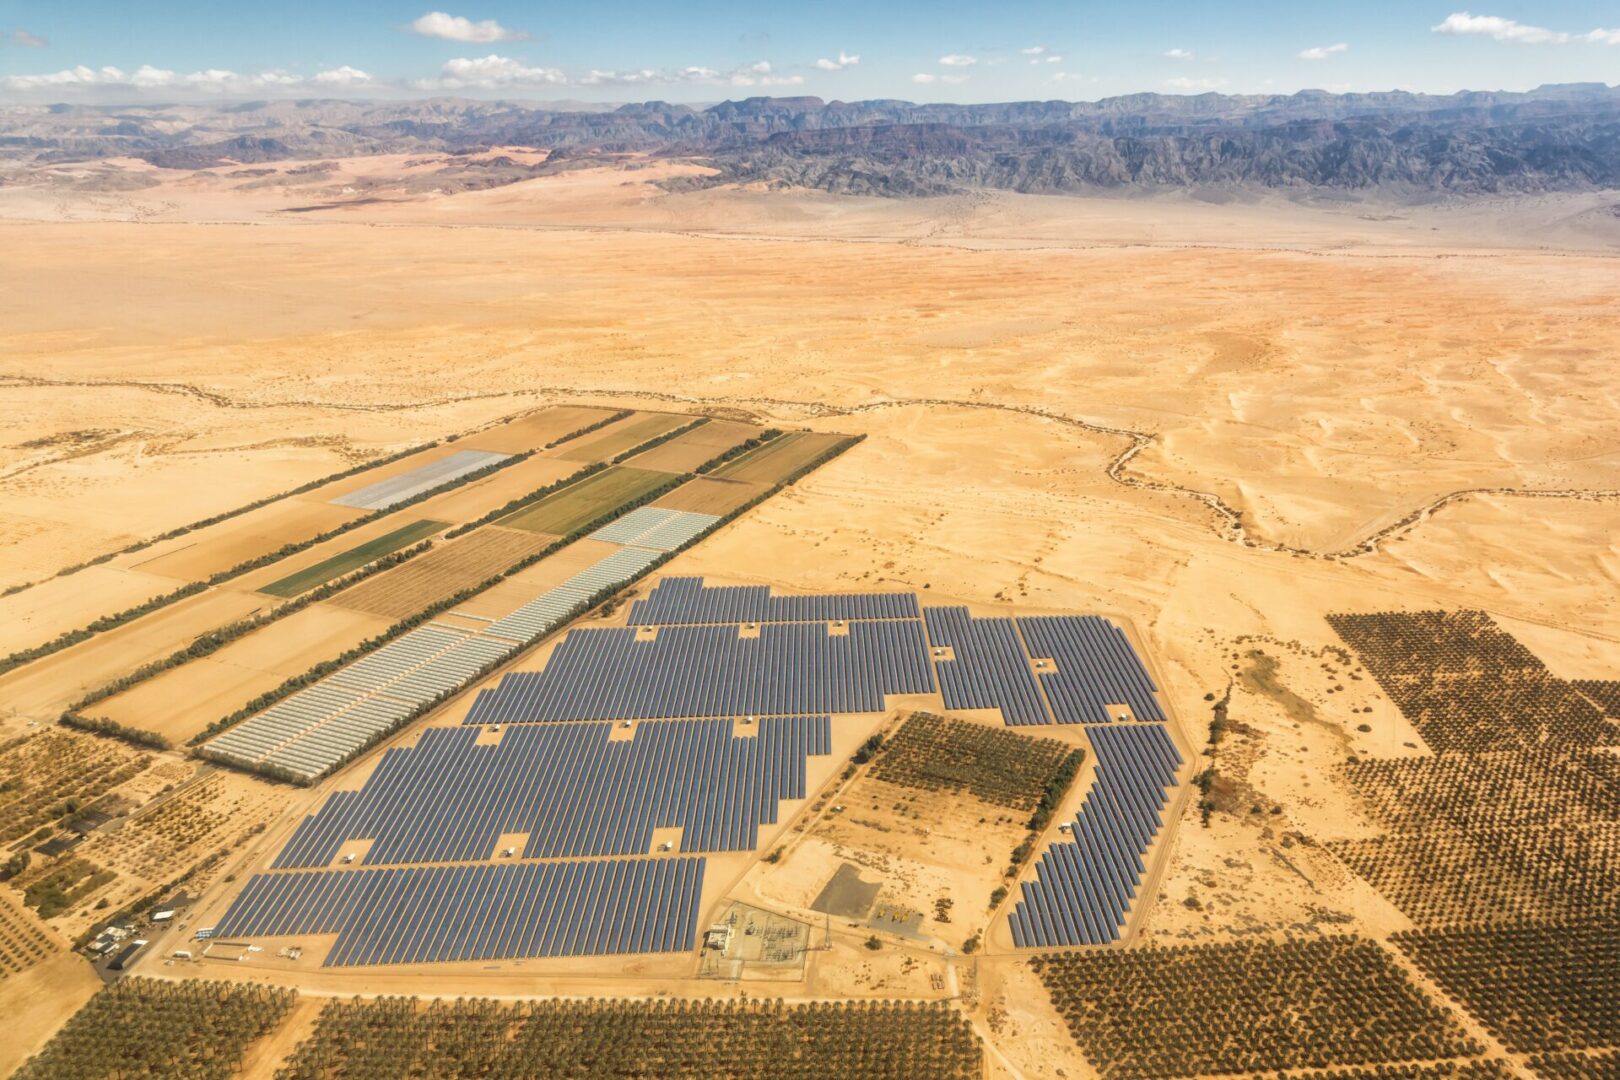 A large field of solar panels in the middle of nowhere.